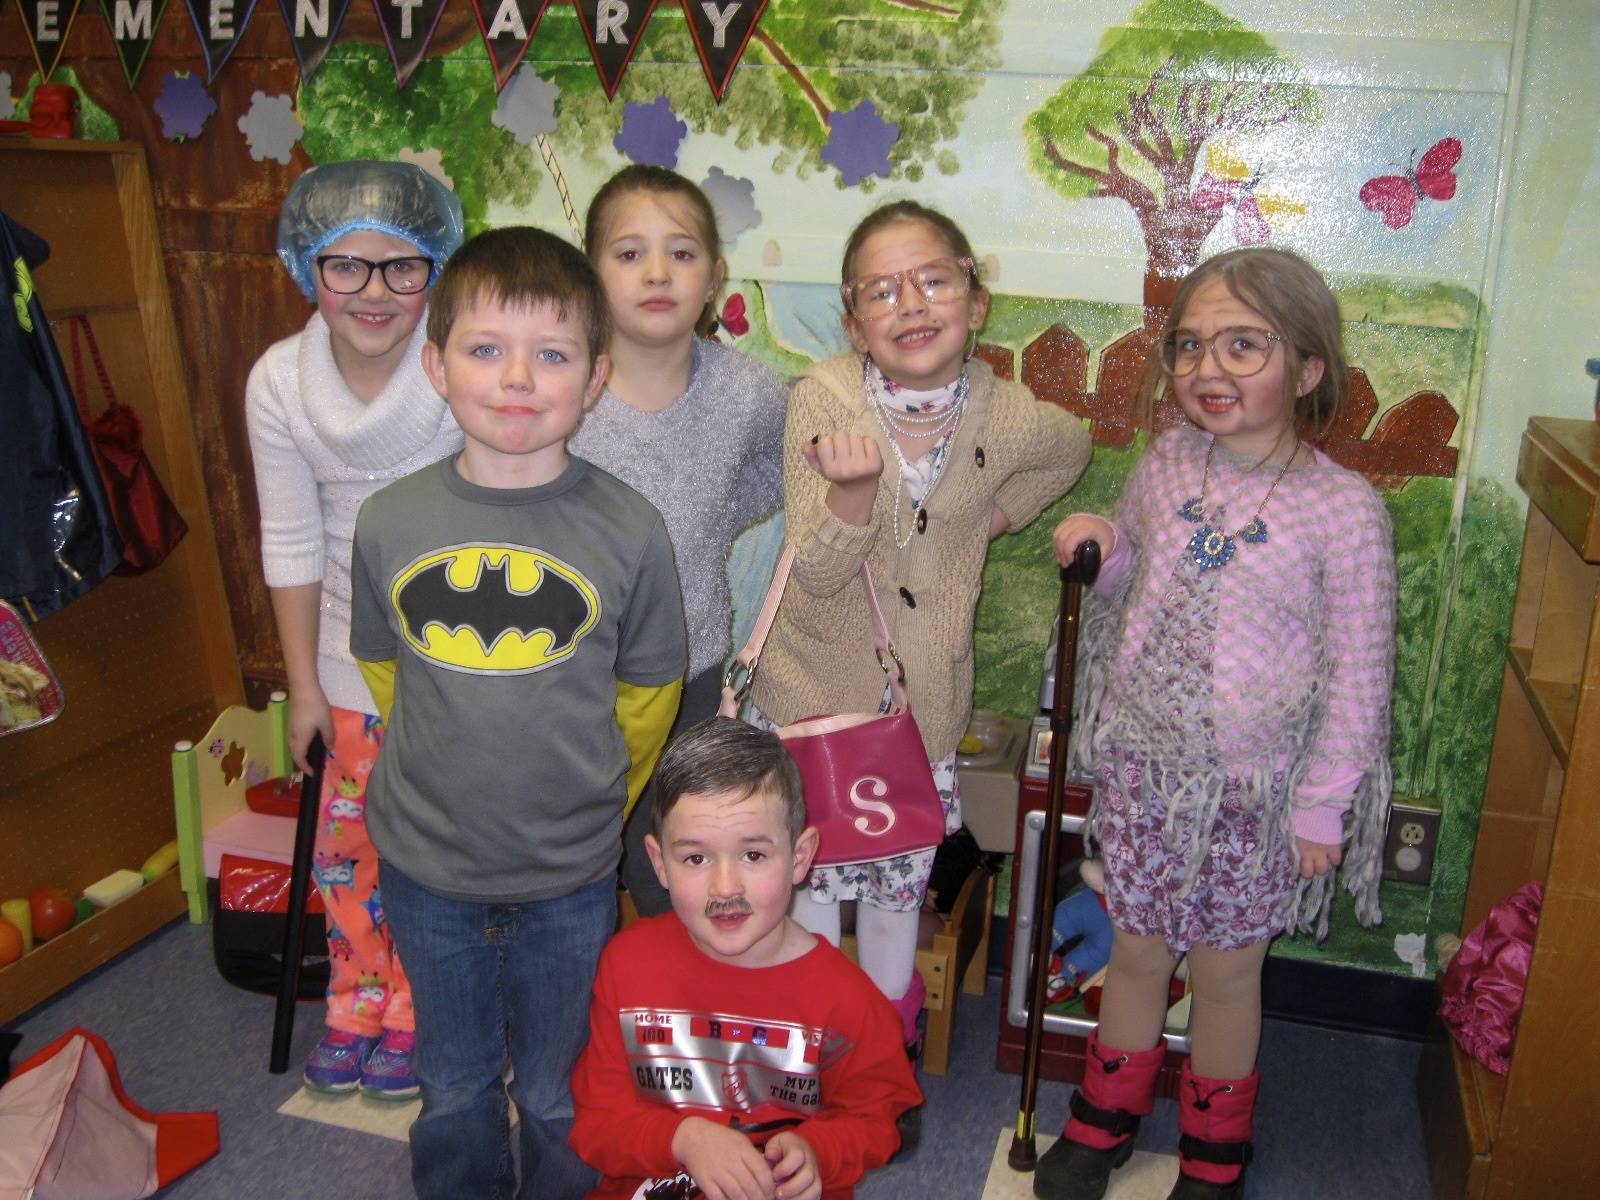 6 students dressed up for 100th day of school.